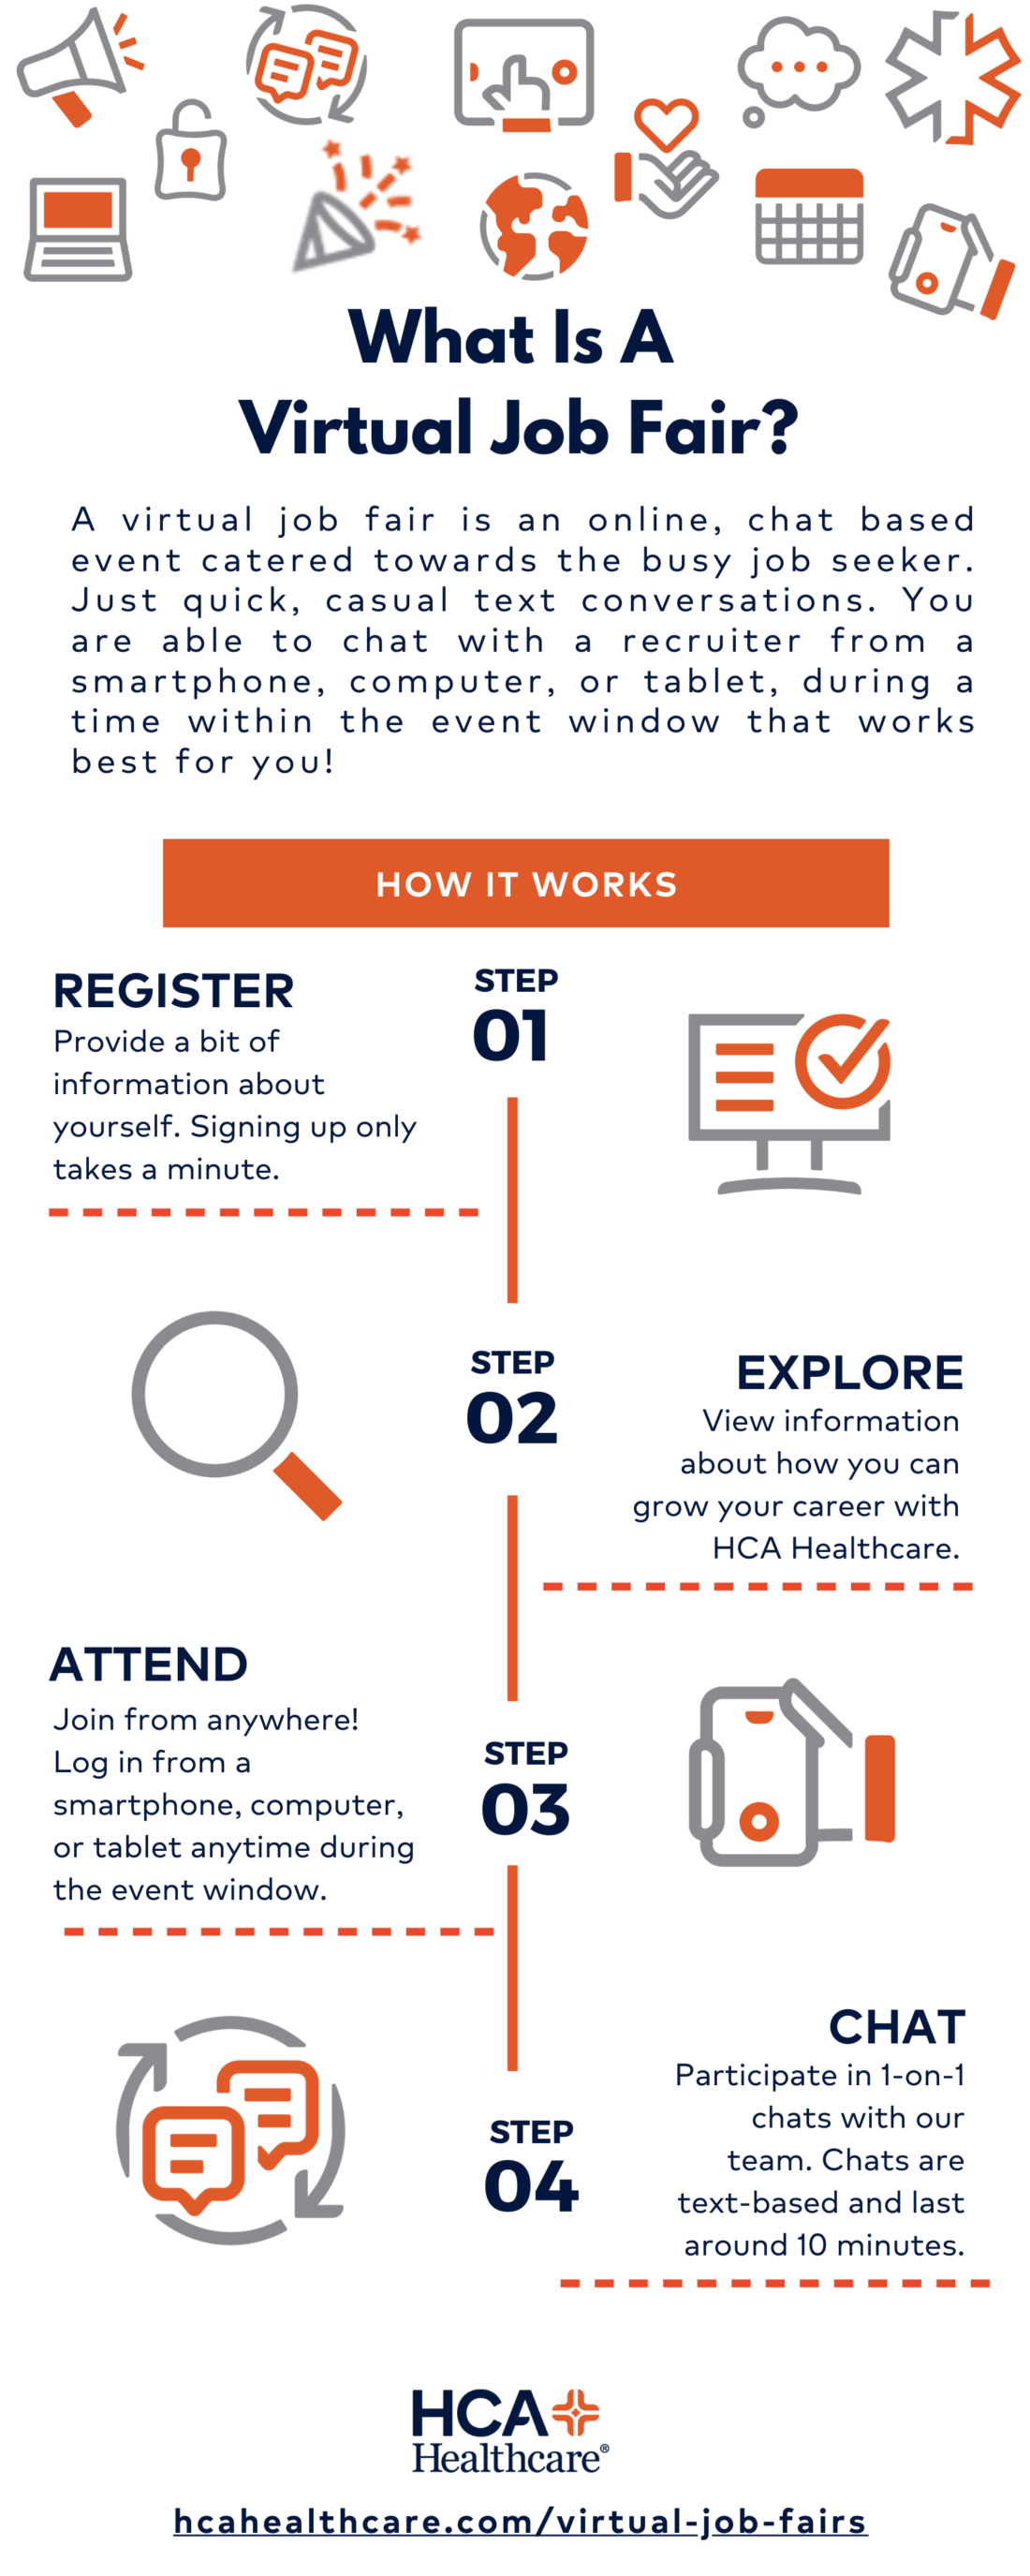 Infographic with step-by-step guide of a virtual job fair